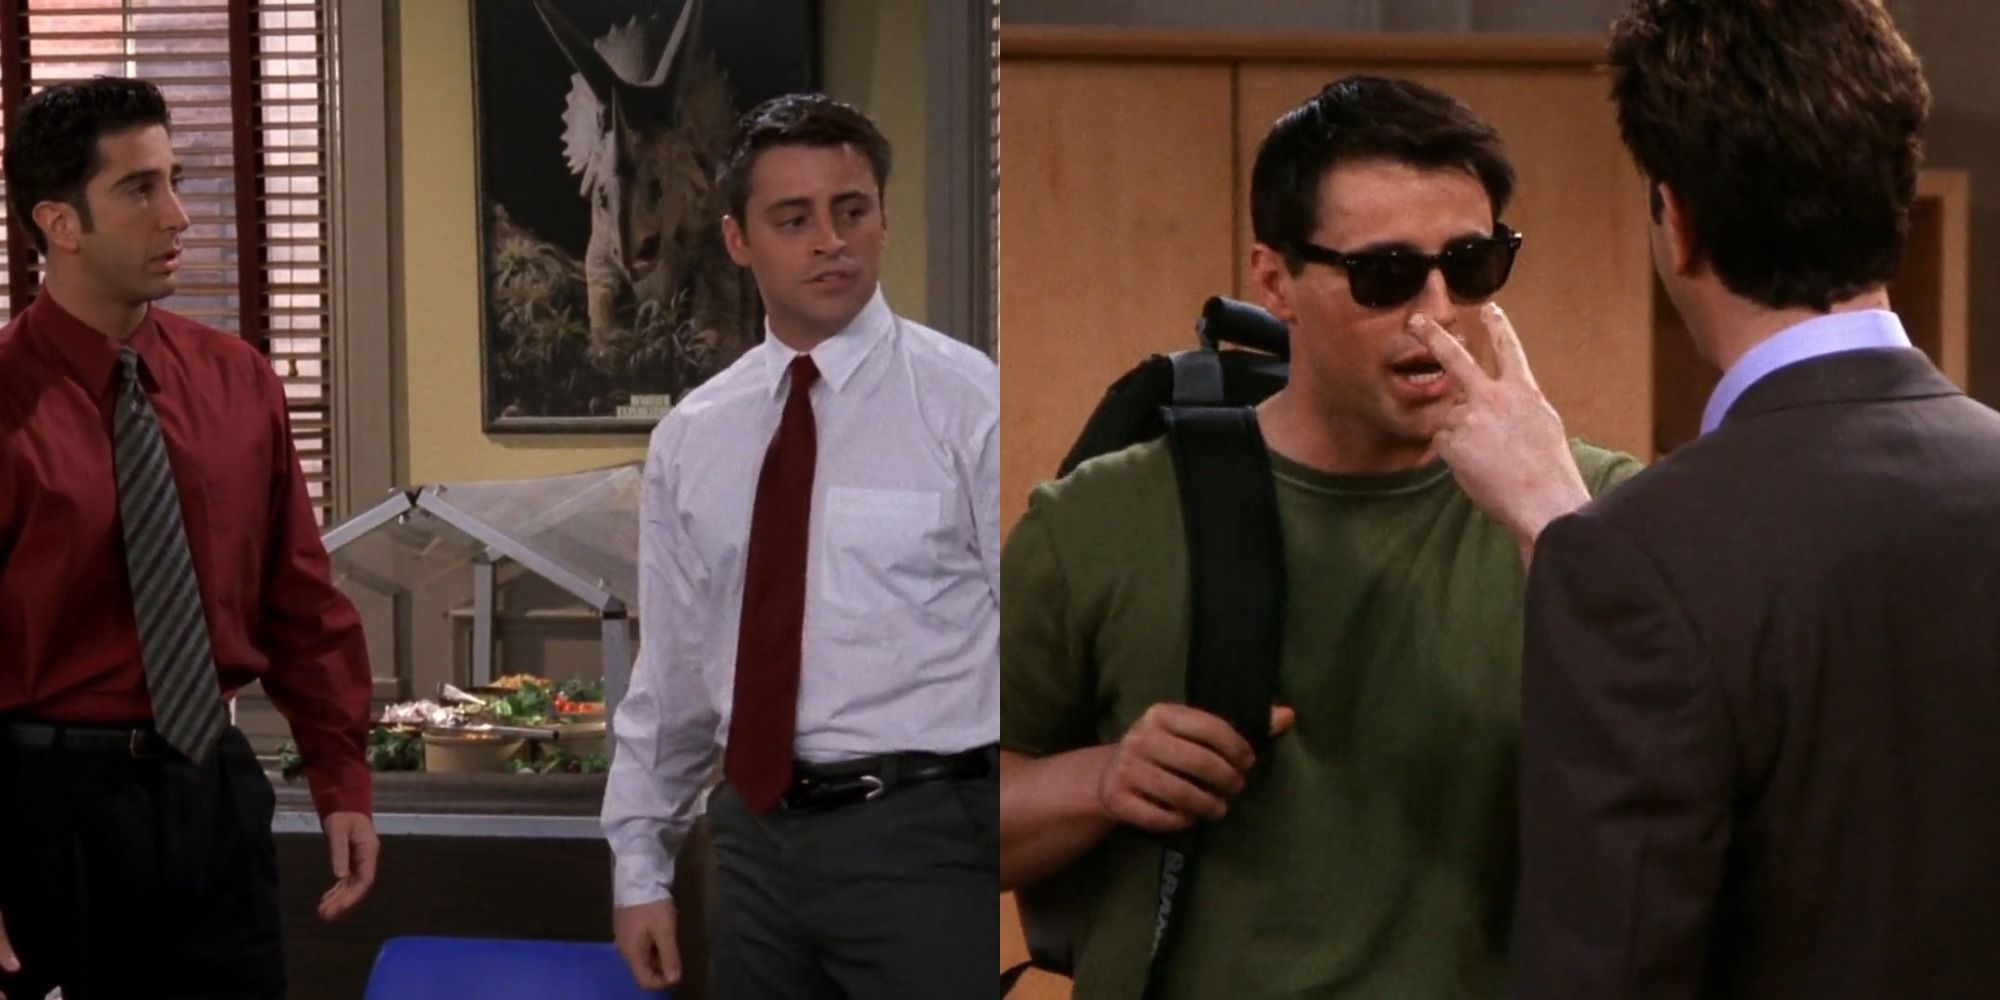 Main feature image showing Ross and Joey from Friends